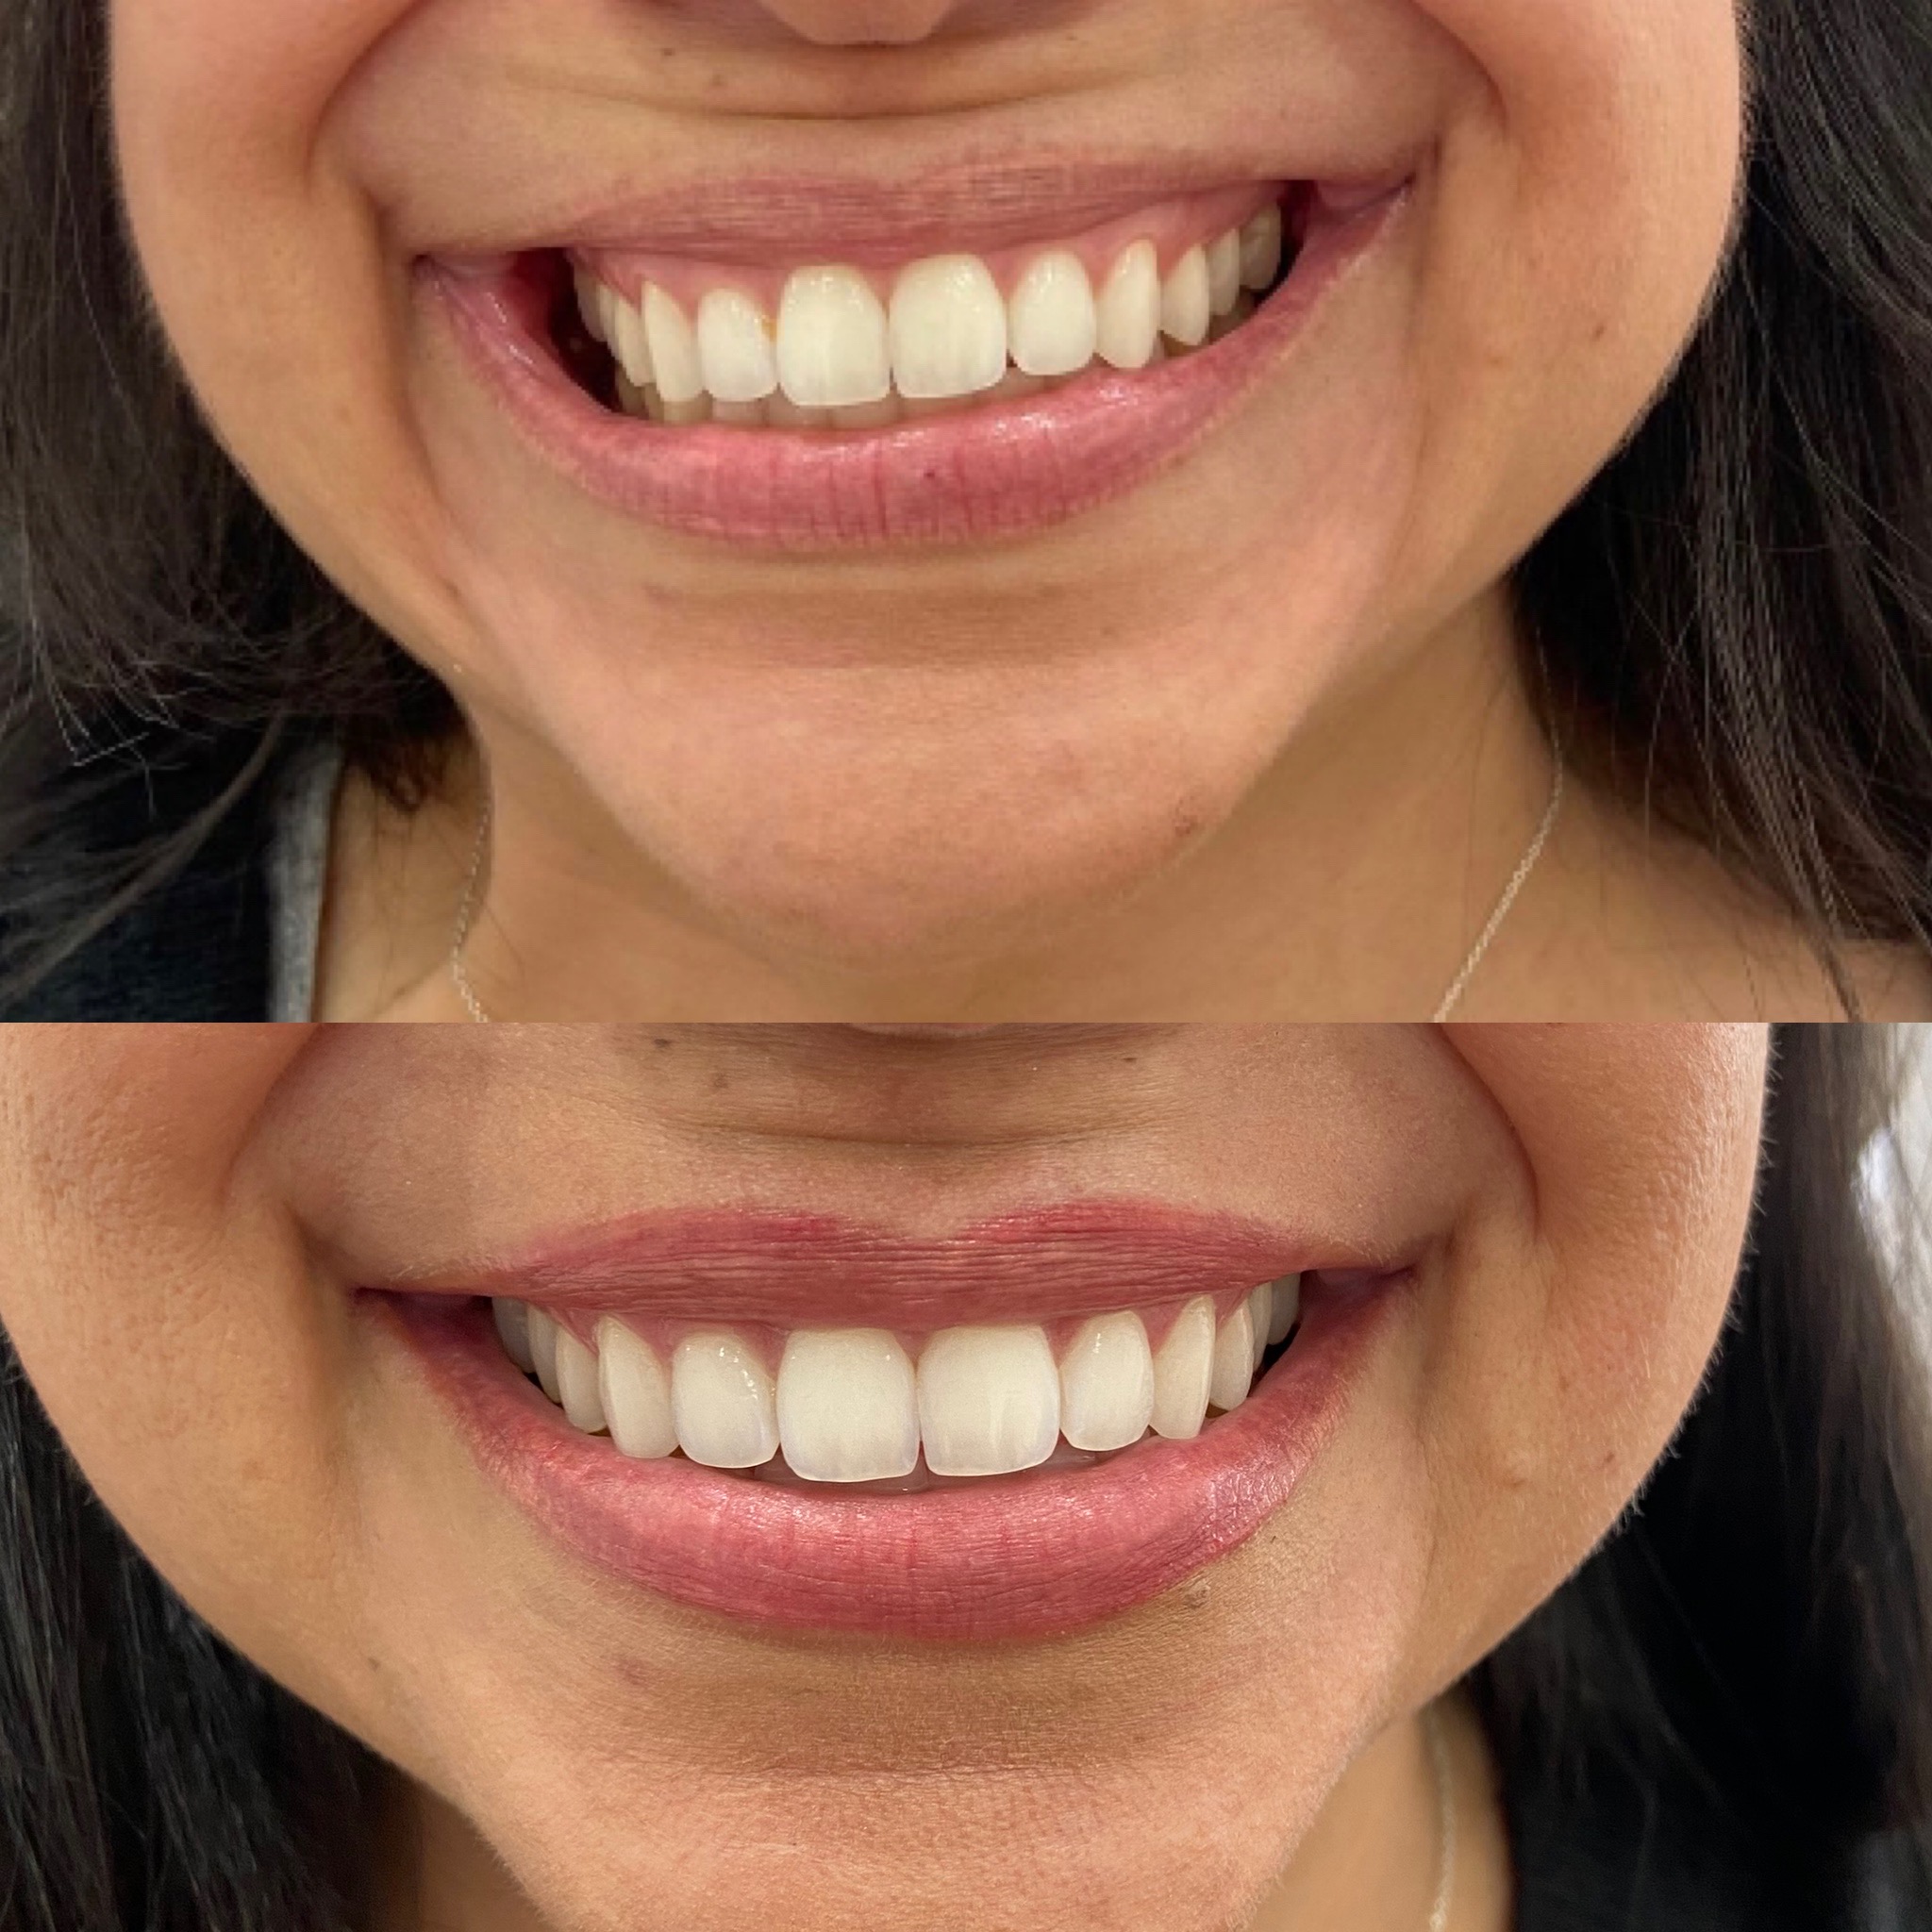 Before and After Lip lines flip Treatment | Beauty Boost Med Spa in Newport Beach, CA